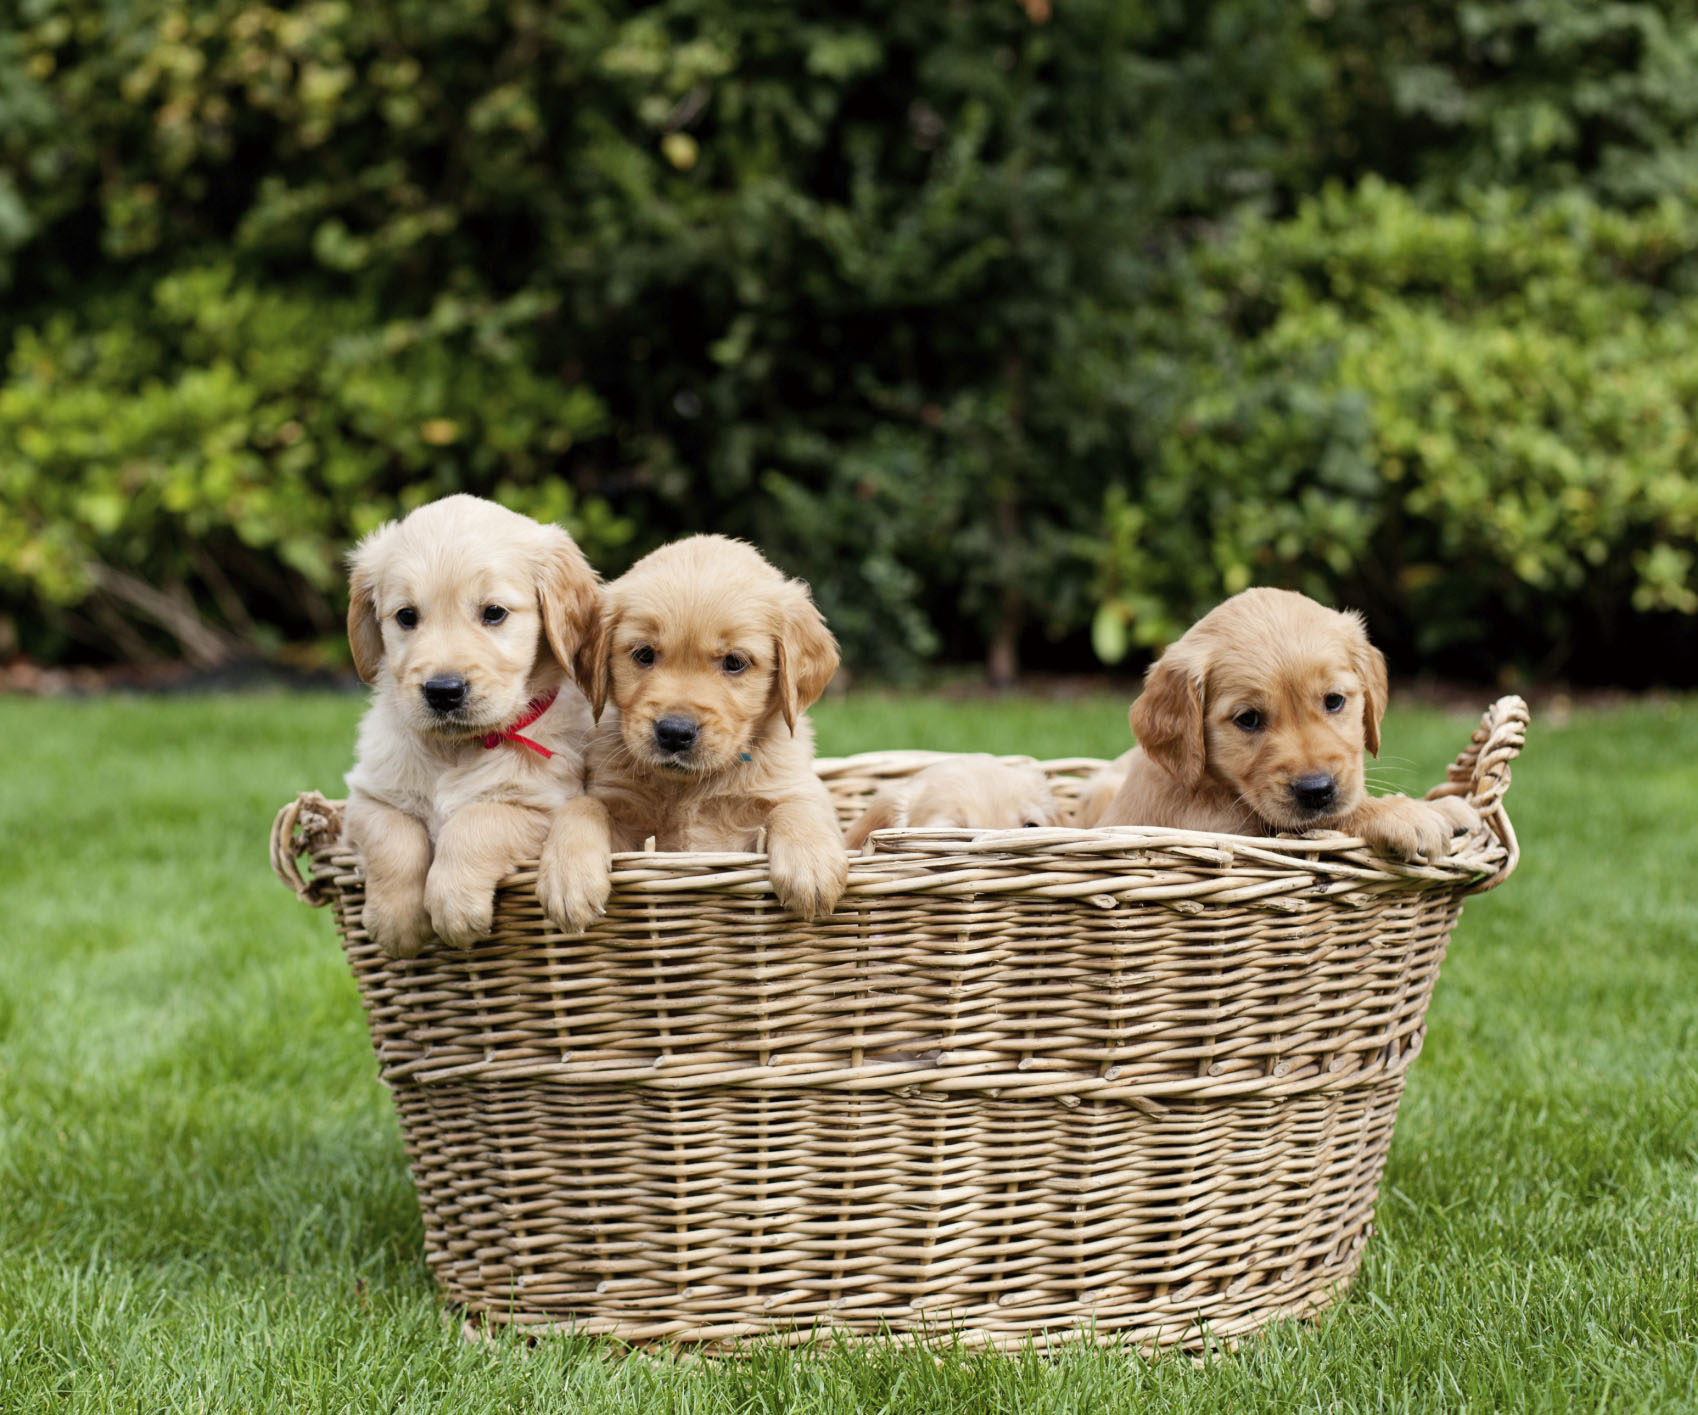 You can have puppies delivered to your office today